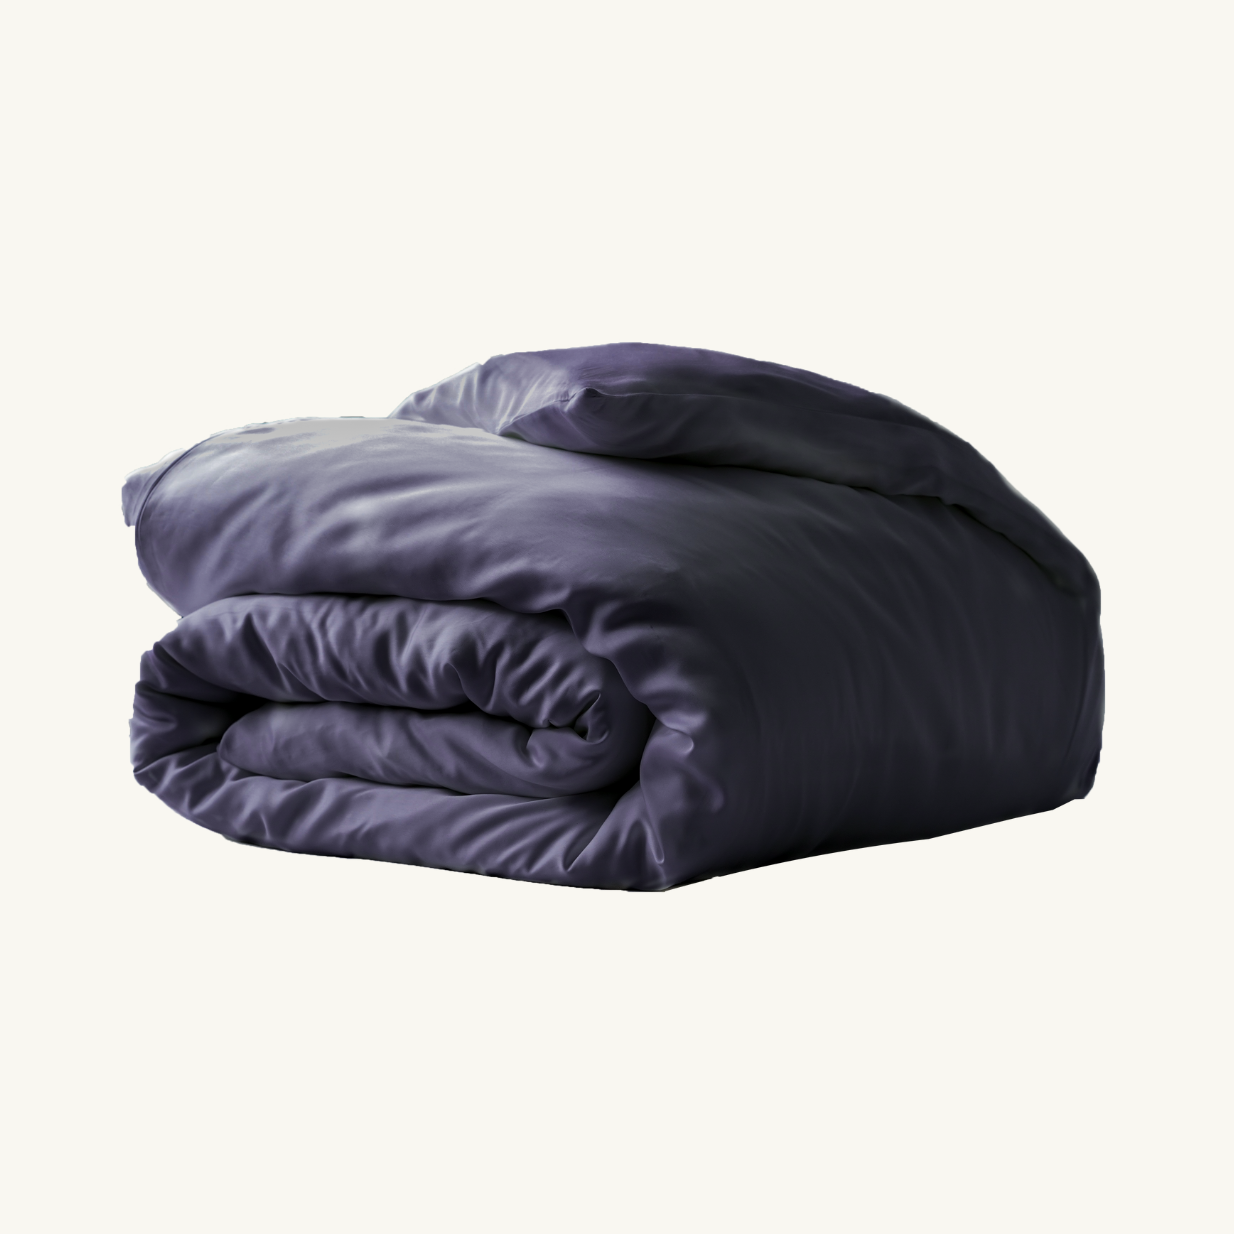 Midnight Blue TENCEL Duvet Cover Quilt Cover Buy quilt cover Singapore and duvet cover Singapore at Weavve Home, know what is quilt cover, what is a duvet cover. Best Bed Sheets Singapore and Luxury Hotel Sheets. 